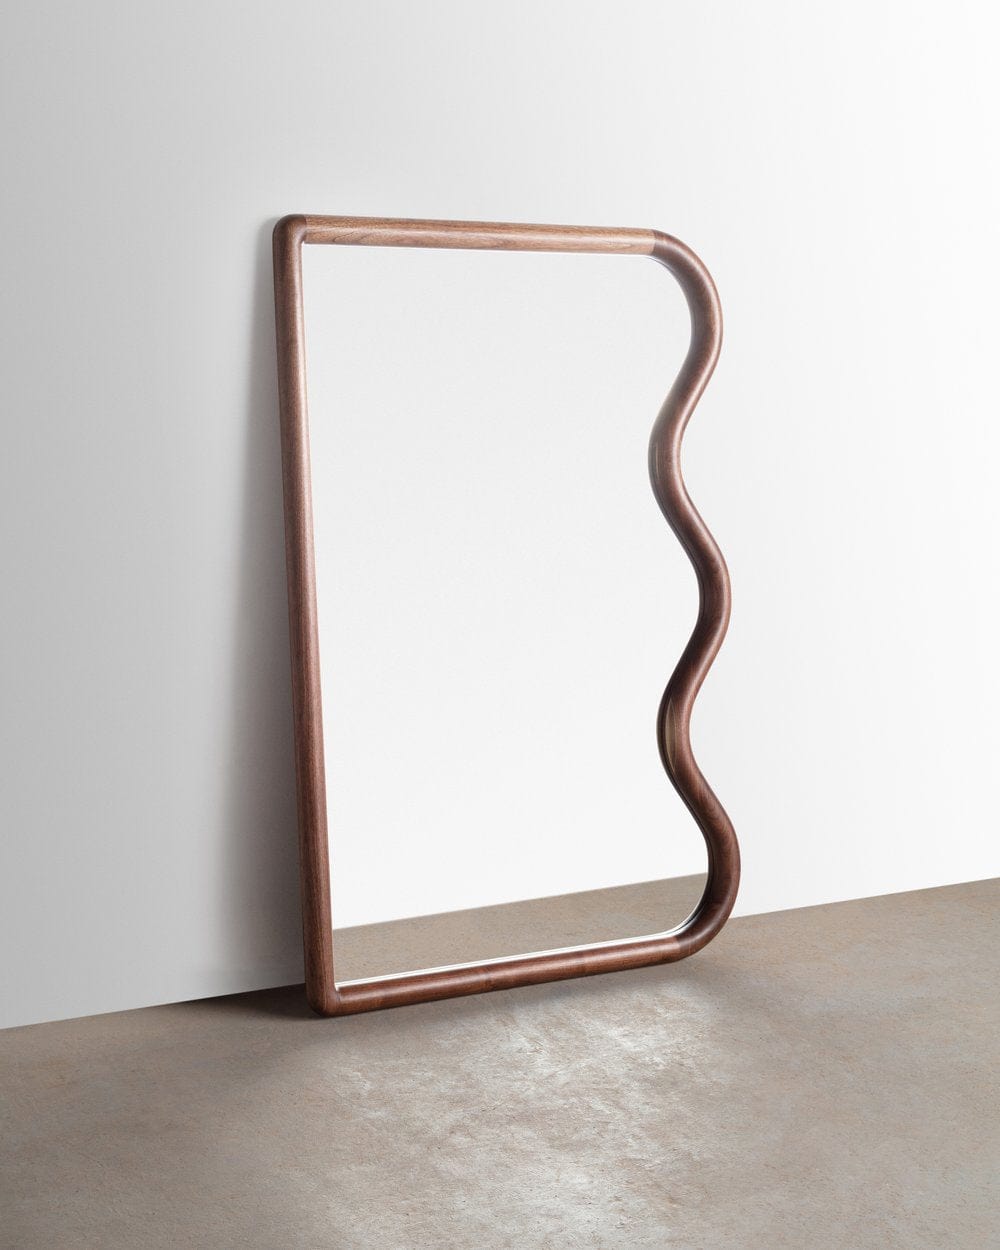 SQUIGGLE MIRROR | SMALL BY CHRISTOPHER MIANO